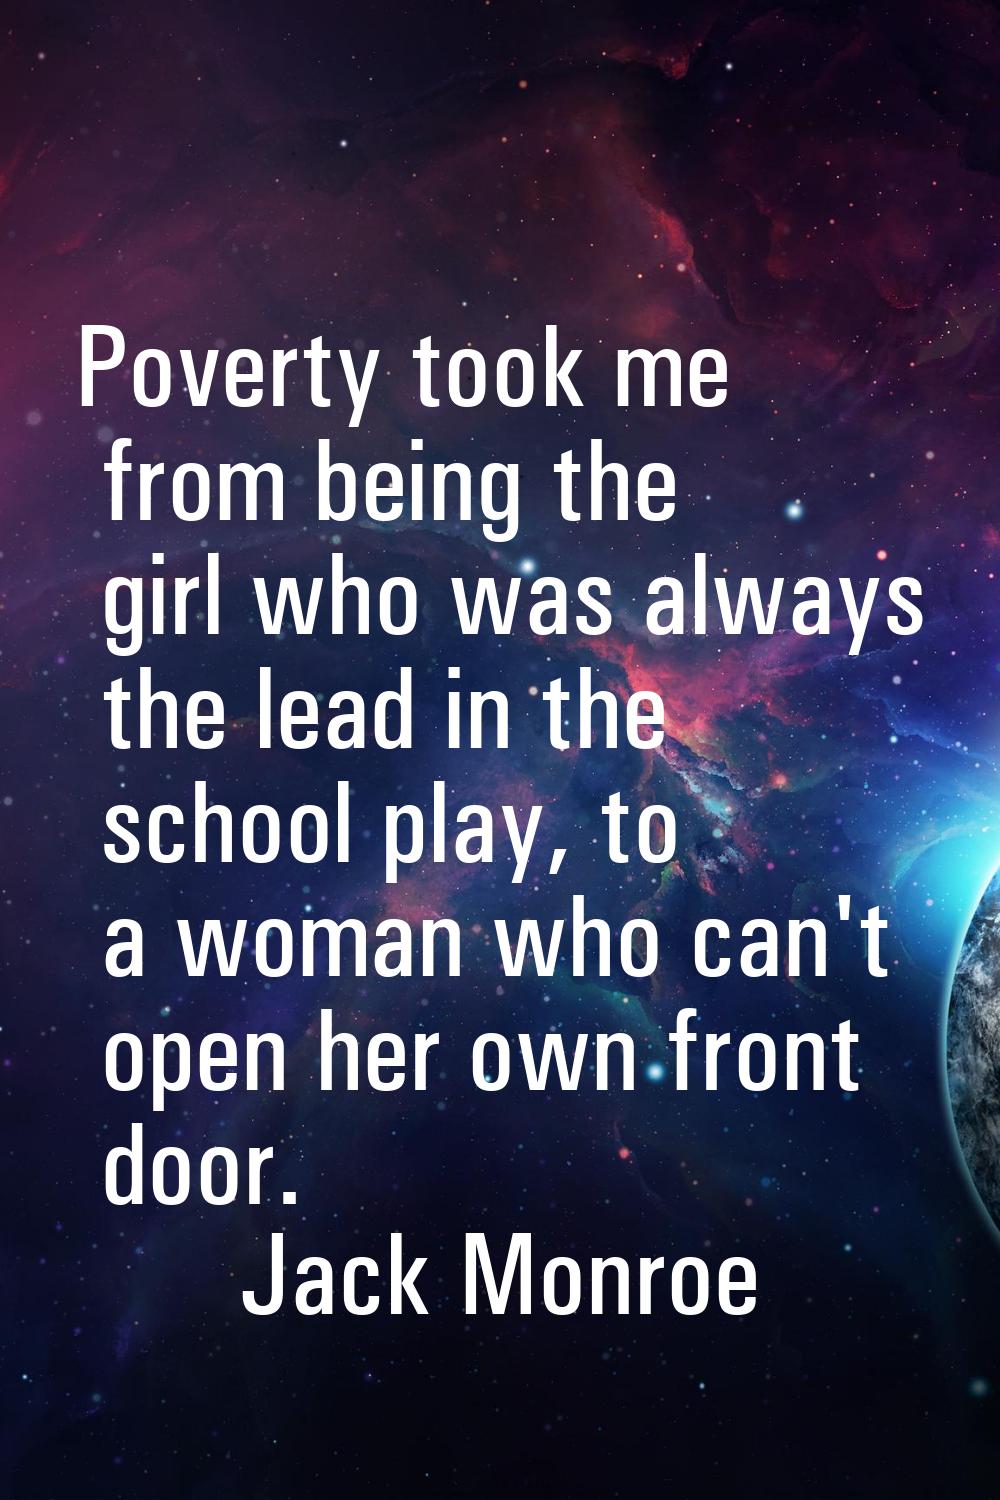 Poverty took me from being the girl who was always the lead in the school play, to a woman who can'